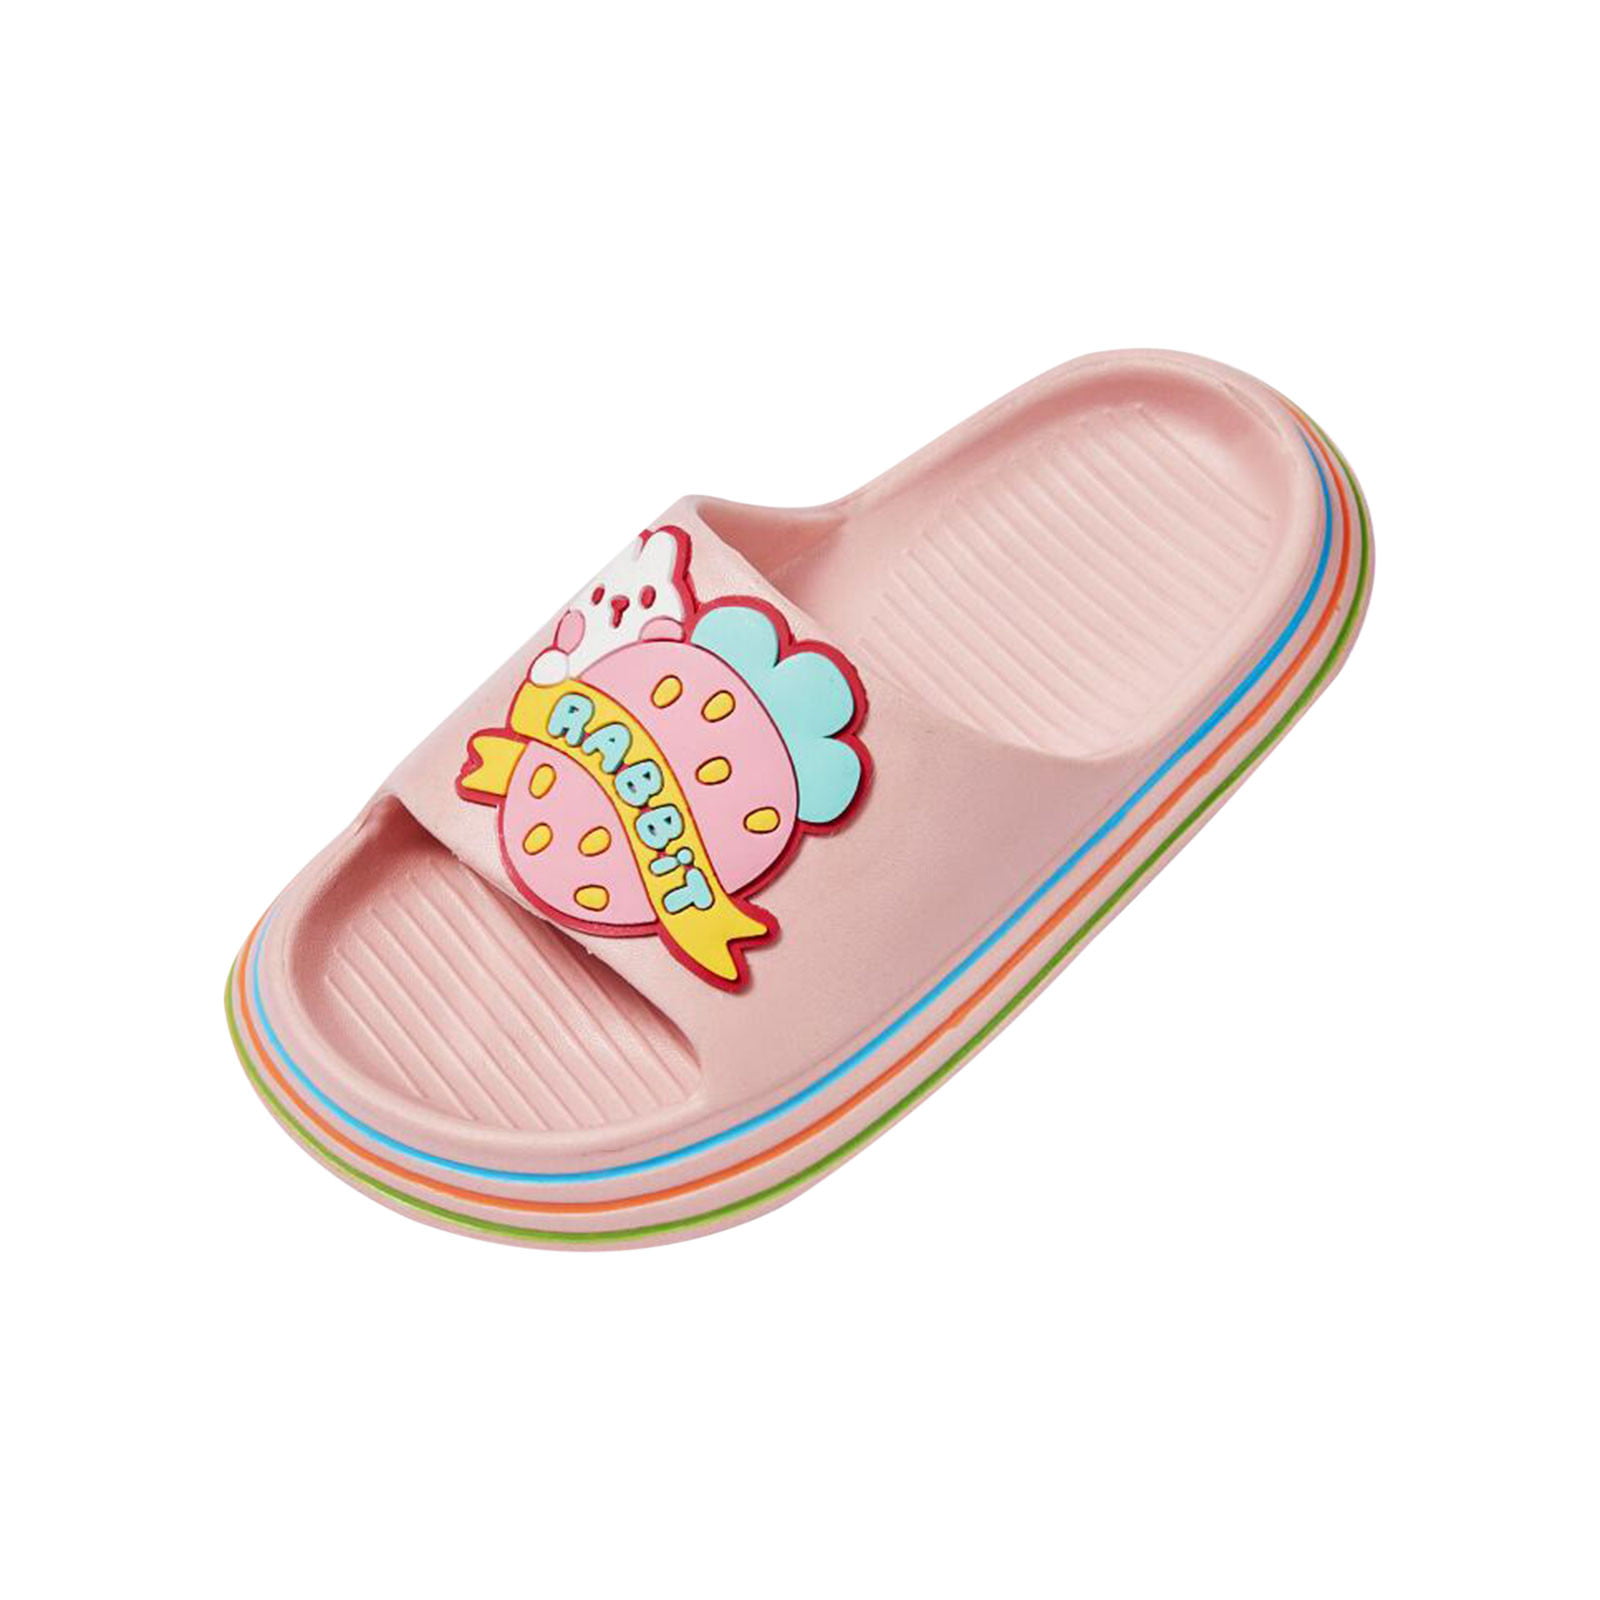 GIRLS KIDS SUMMER FANCY PARTY BEACH HOLIDAY CASUAL SLIDERS INFANTS SANDALS SHOES 